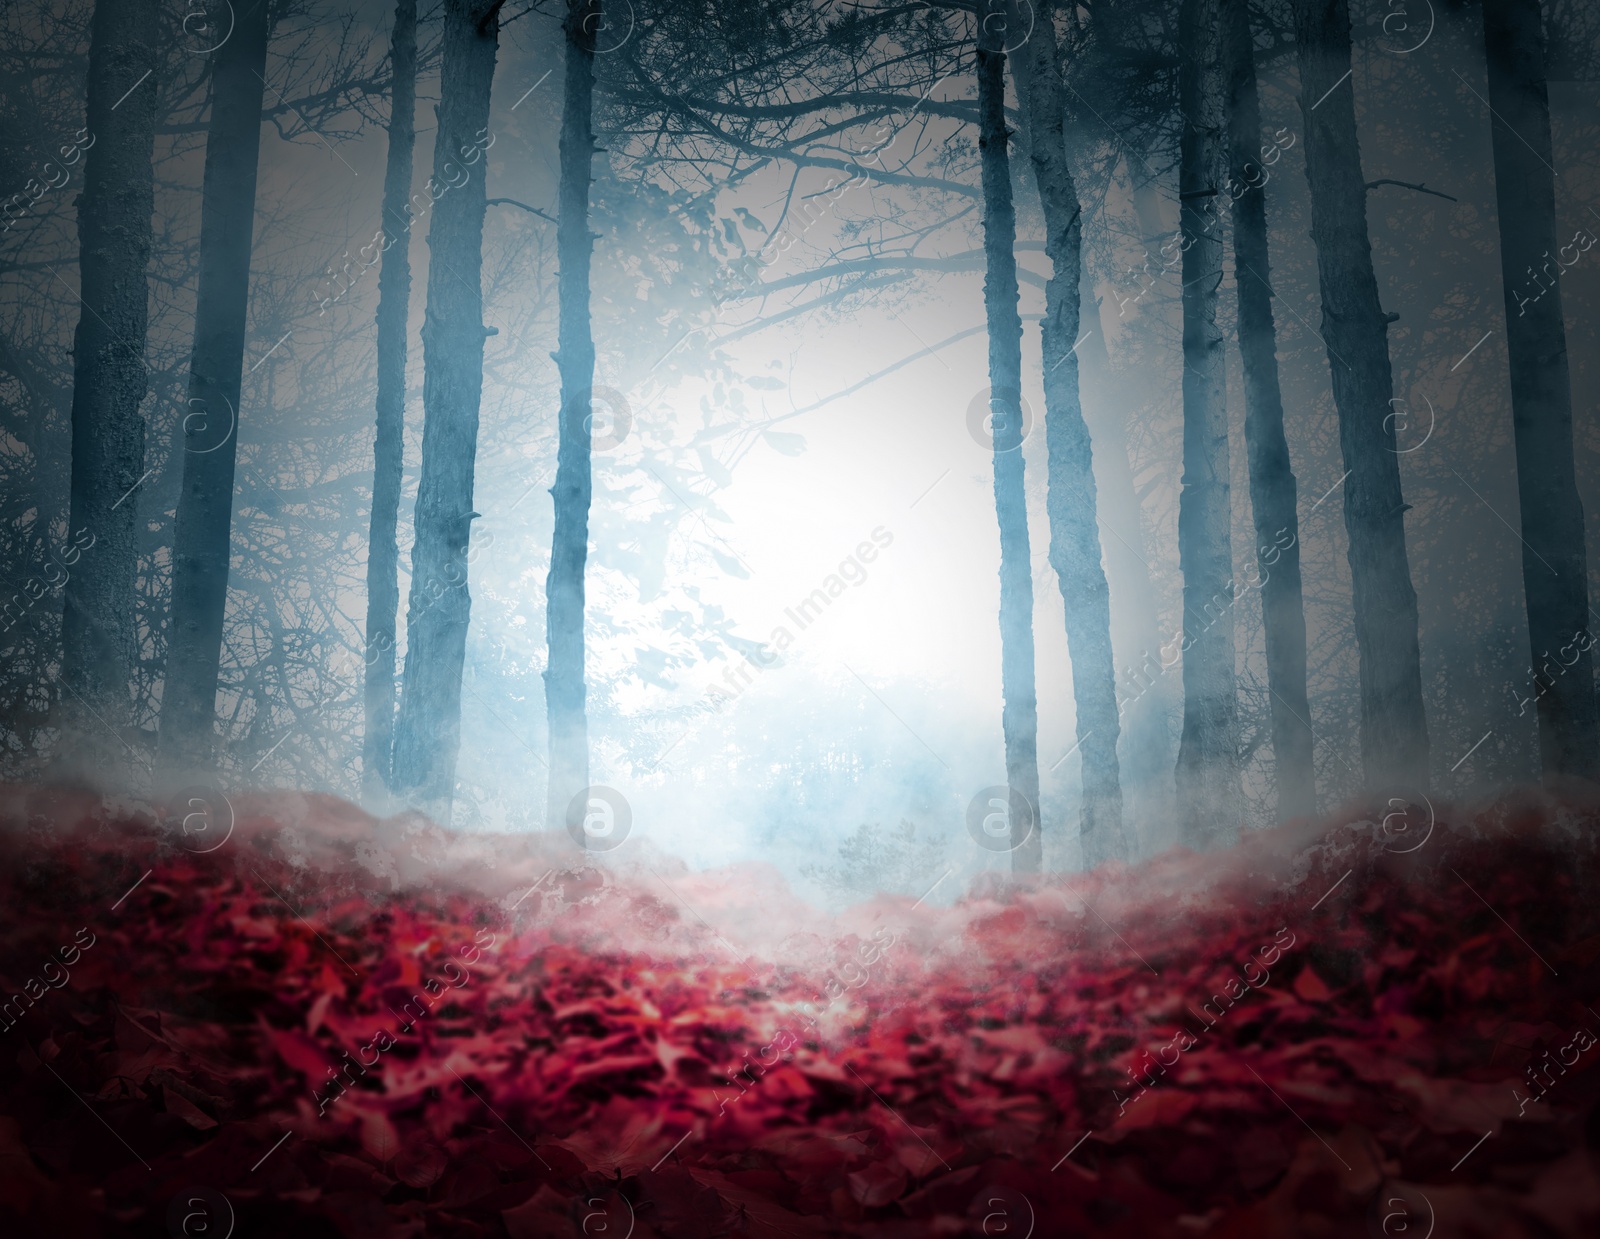 Image of Fantasy world. Creepy foggy forest with fallen red leaves